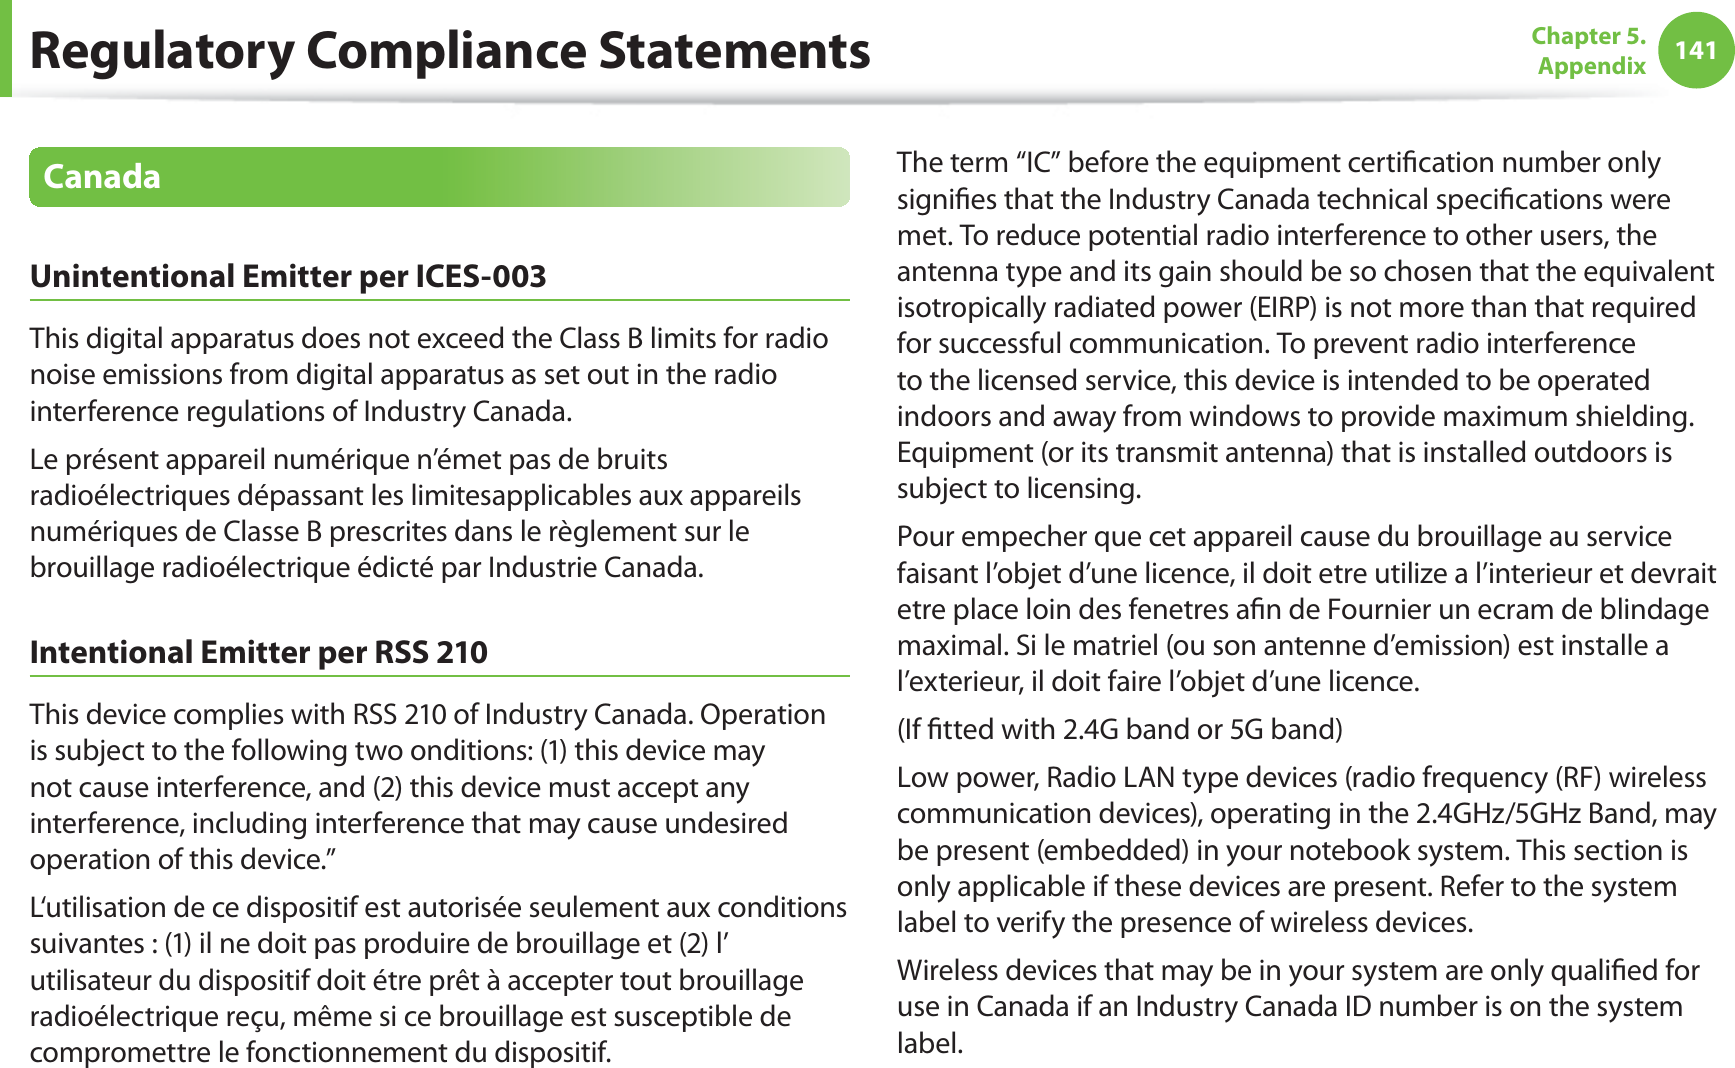 141Chapter 5.  AppendixCanadaUnintentional Emitter per ICES-003This digital apparatus does not exceed the Class B limits for radio noise emissions from digital apparatus as set out in the radio interference regulations of Industry Canada.Le présent appareil numérique n’émet pas de bruits radioélectriques dépassant les limitesapplicables aux appareils numériques de Classe B prescrites dans le règlement sur le brouillage radioélectrique édicté par Industrie Canada.Intentional Emitter per RSS 210This device complies with RSS 210 of Industry Canada. Operation is subject to the following two onditions: (1) this device may not cause interference, and (2) this device must accept any interference, including interference that may cause undesired operation of this device.”L‘utilisation de ce dispositif est autorisée seulement aux conditions suivantes : (1) il ne doit pas produire de brouillage et (2) l’ utilisateur du dispositif doit étre prêt à accepter tout brouillage radioélectrique reçu, même si ce brouillage est susceptible de compromettre le fonctionnement du dispositif.The term “IC” before the equipment certiﬁcation number only signiﬁes that the Industry Canada technical speciﬁcations were met. To reduce potential radio interference to other users, the antenna type and its gain should be so chosen that the equivalent isotropically radiated power (EIRP) is not more than that required for successful communication. To prevent radio interference to the licensed service, this device is intended to be operated indoors and away from windows to provide maximum shielding. Equipment (or its transmit antenna) that is installed outdoors is subject to licensing.Pour empecher que cet appareil cause du brouillage au service faisant l’objet d’une licence, il doit etre utilize a l’interieur et devrait etre place loin des fenetres aﬁn de Fournier un ecram de blindage maximal. Si le matriel (ou son antenne d’emission) est installe a l’exterieur, il doit faire l’objet d’une licence.(If ﬁtted with 2.4G band or 5G band) Low power, Radio LAN type devices (radio frequency (RF) wireless communication devices), operating in the 2.4GHz/5GHz Band, may be present (embedded) in your notebook system. This section is only applicable if these devices are present. Refer to the system label to verify the presence of wireless devices.Wireless devices that may be in your system are only qualiﬁed for use in Canada if an Industry Canada ID number is on the system label.Regulatory Compliance Statements